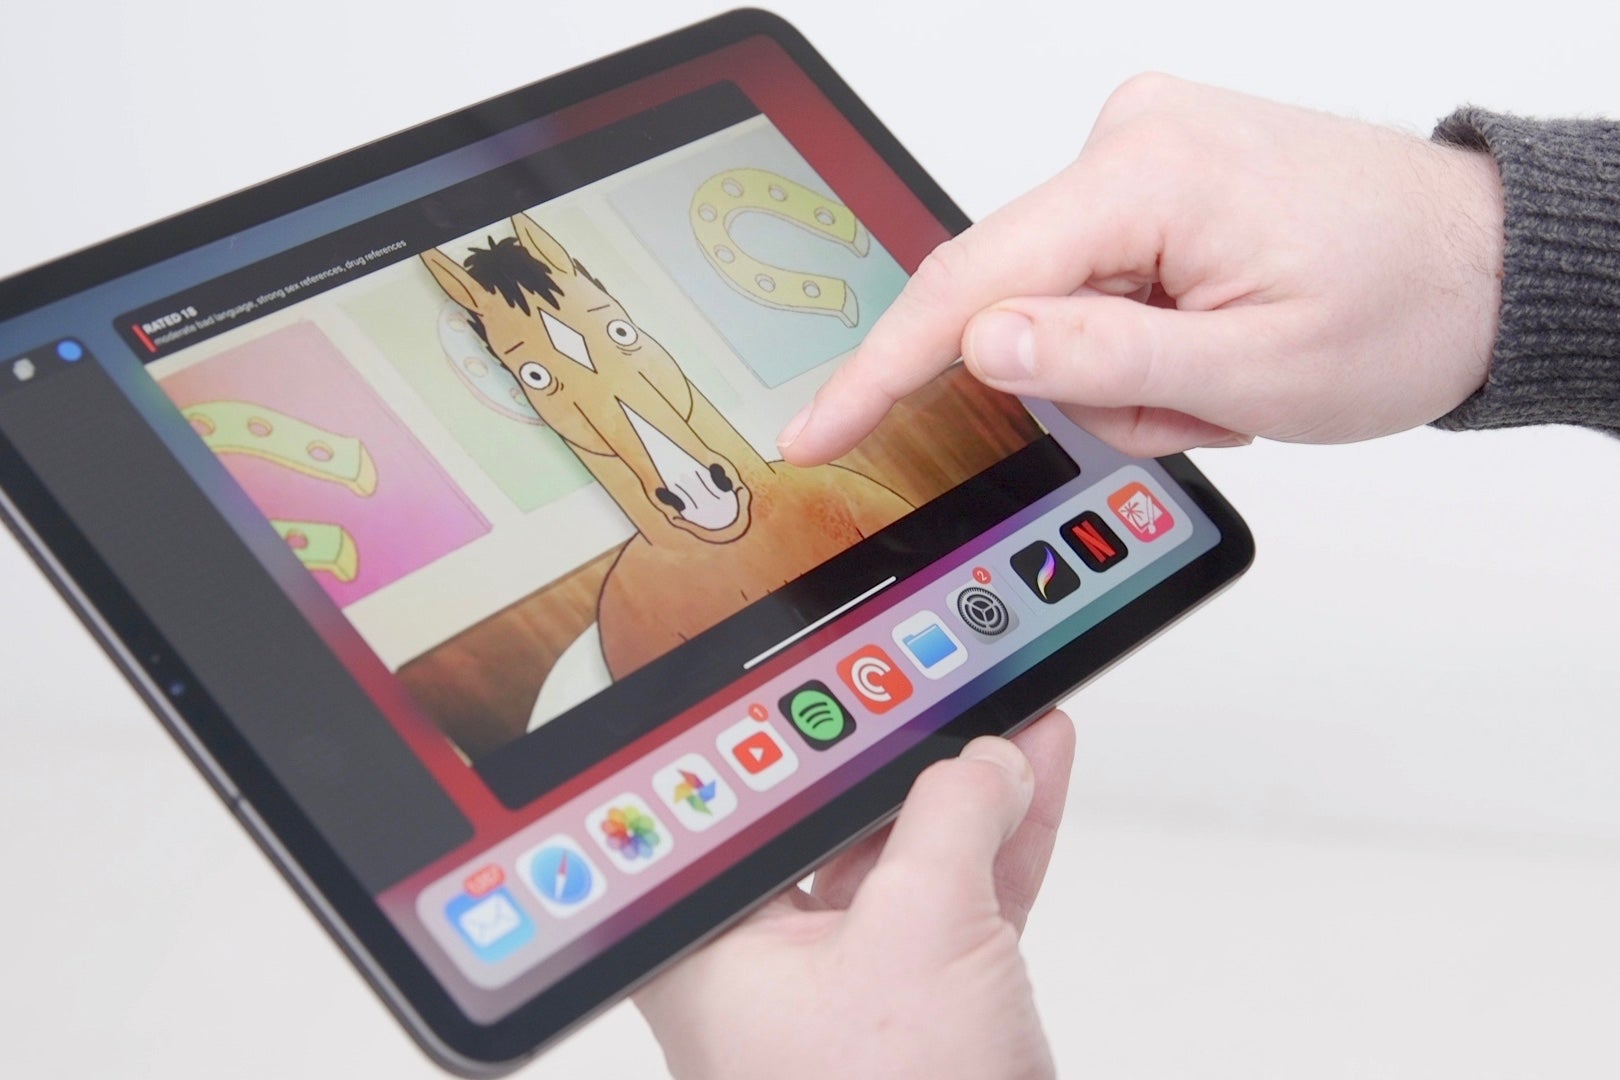 iPad Pro users are still complaining about long-standing screen issues